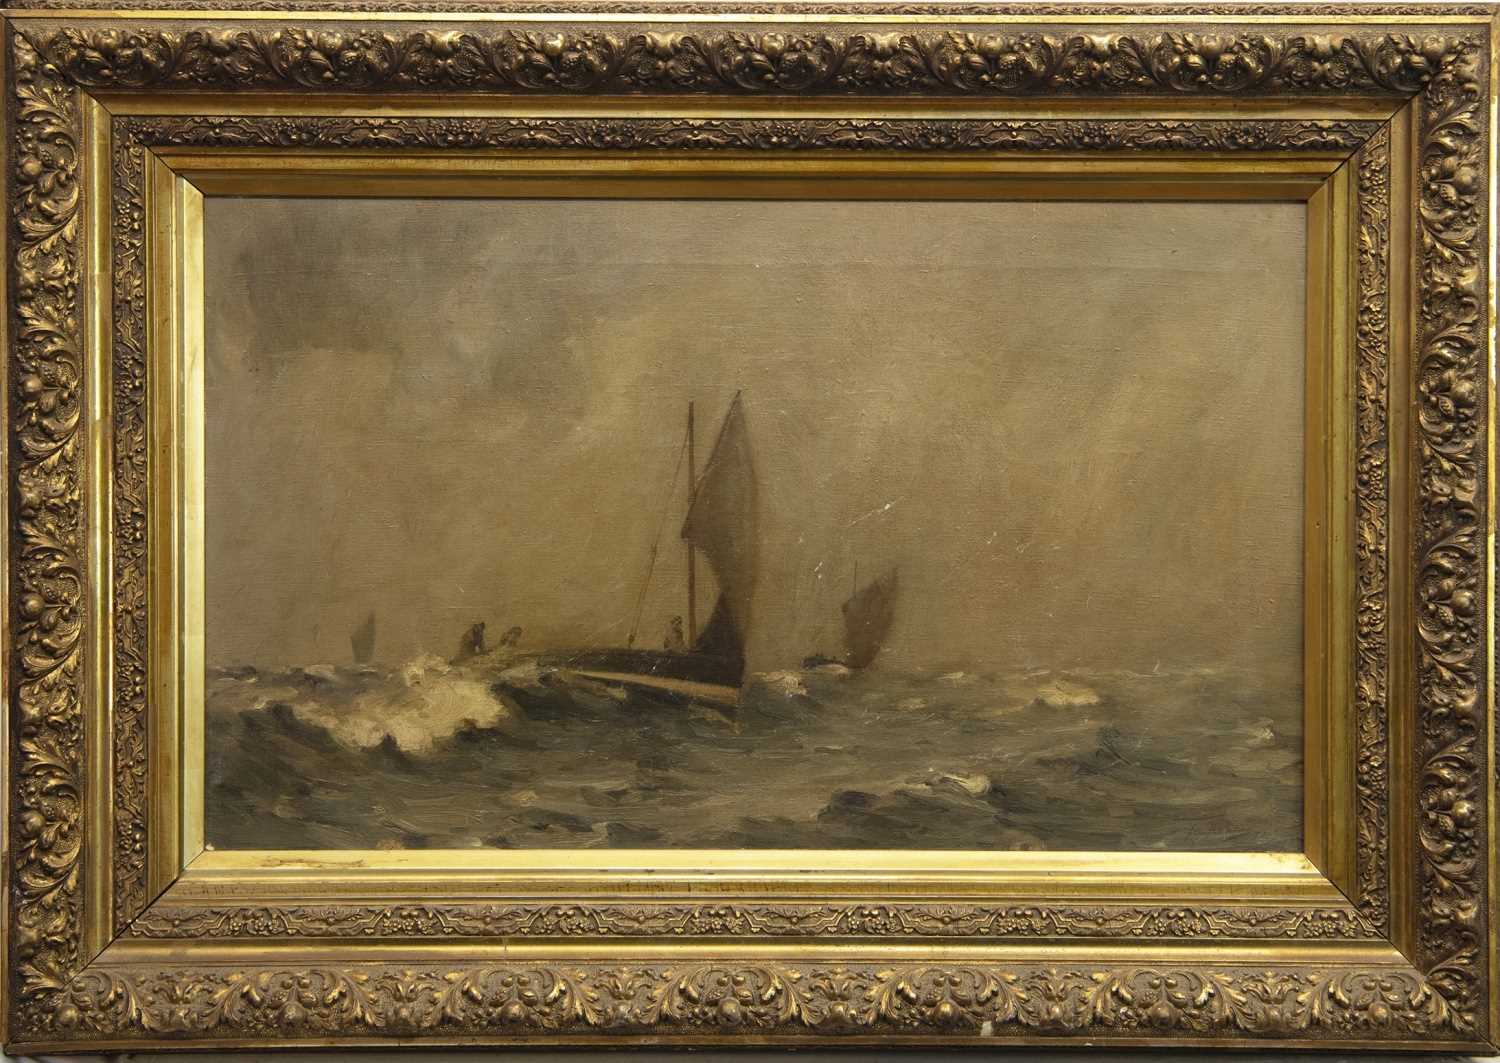 Lot 54 - SAILBOATS IN ROUGH SEAS, AN OIL BY JOHN CAMPBELL MITCHELL